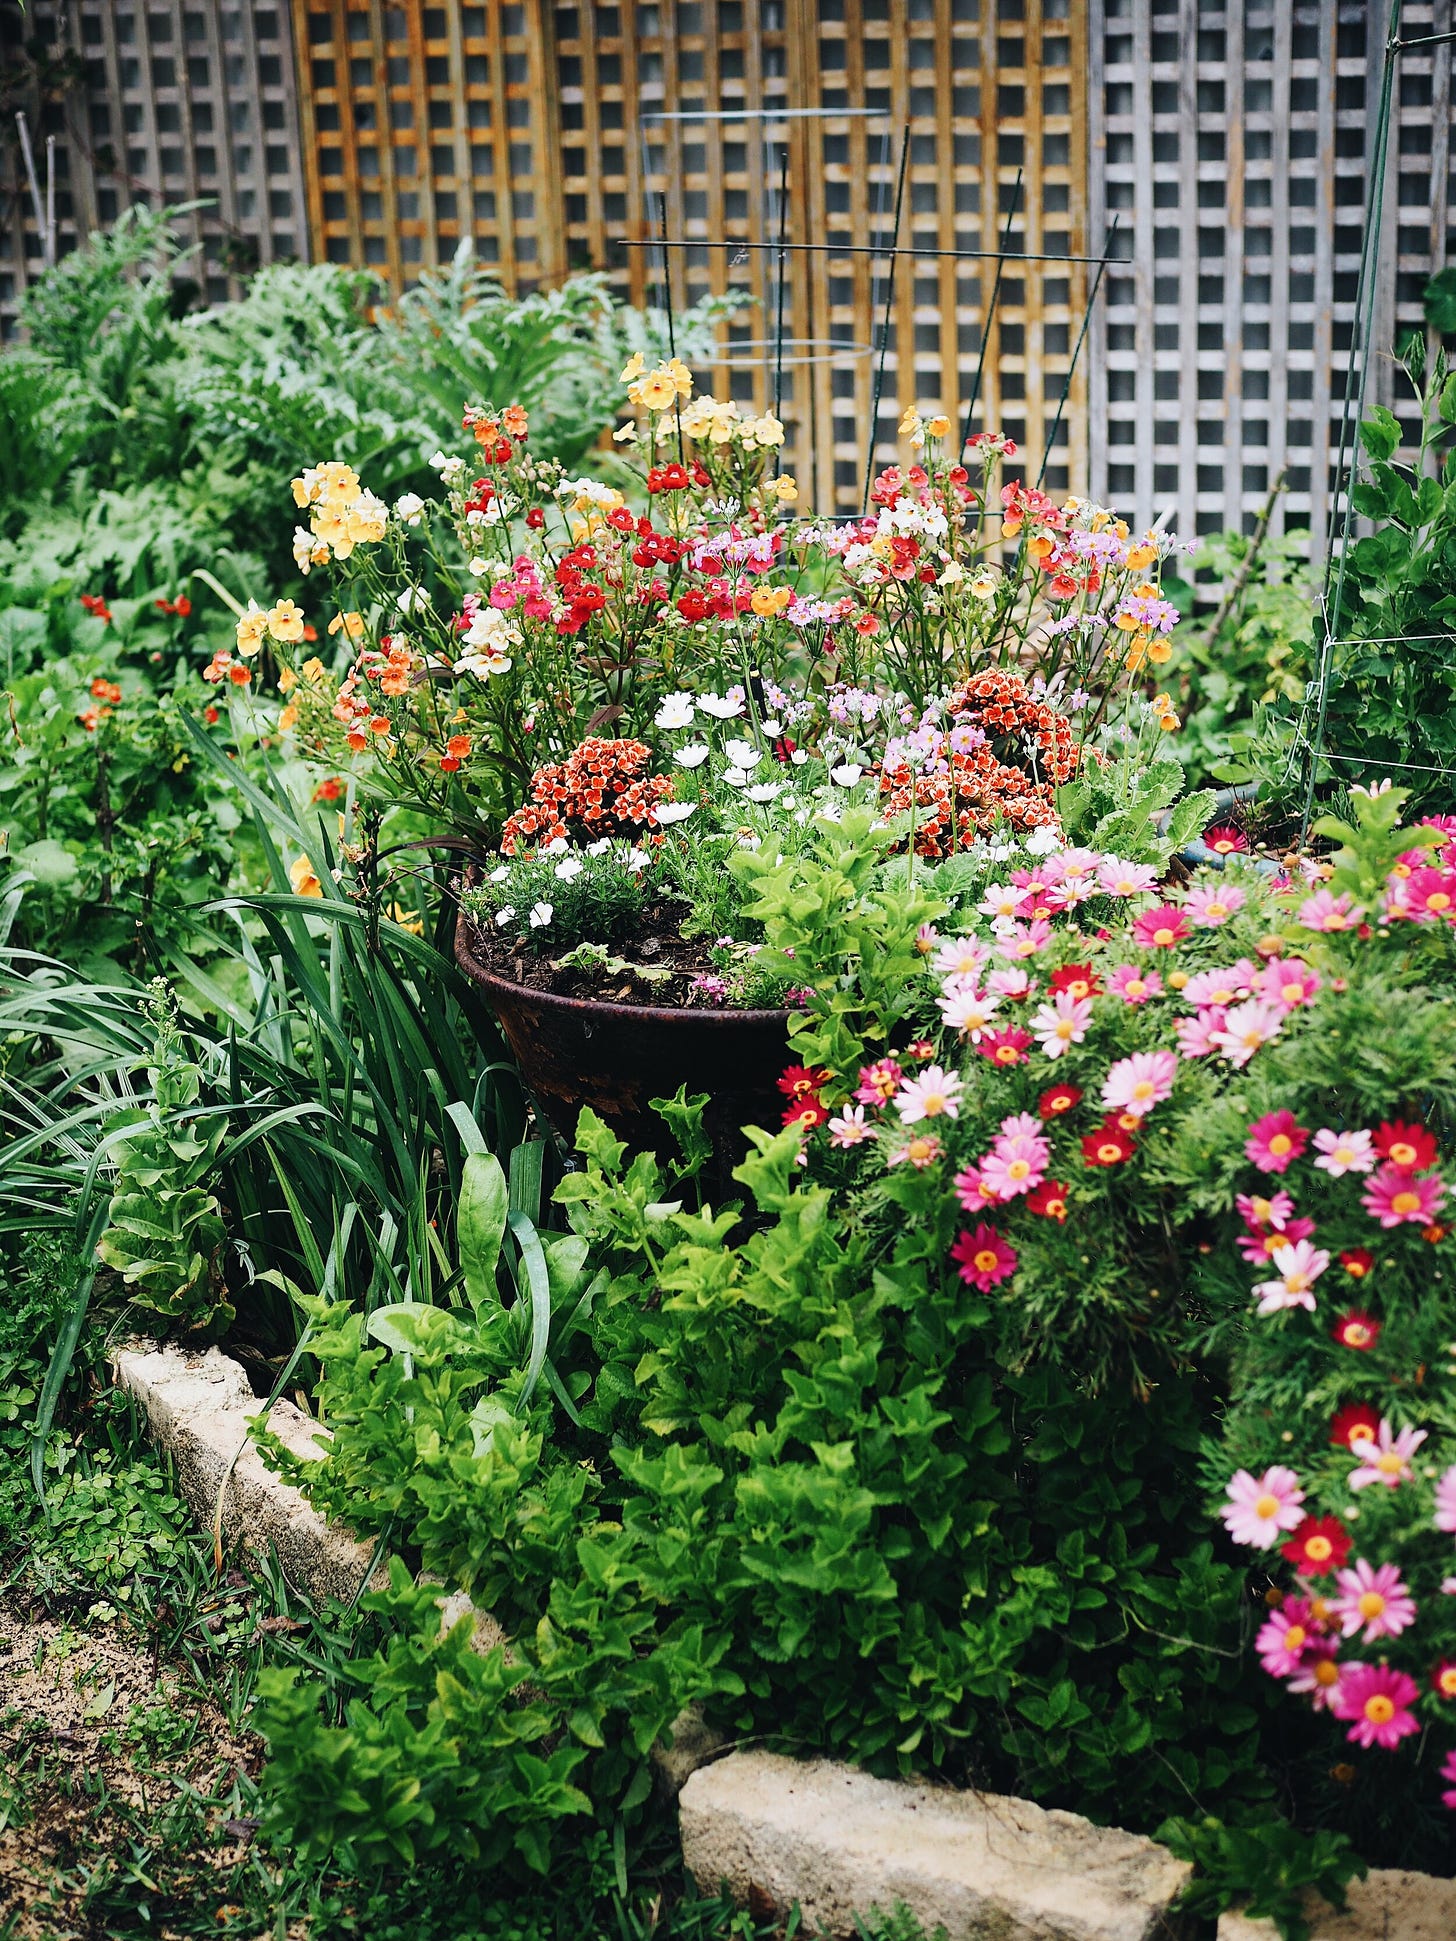 A wheelbarrow filled with orange, red and yellow Nemesia (back row), pink Primulas (middle row), orange and yellow Kalanchoe and little white daisies (front row).